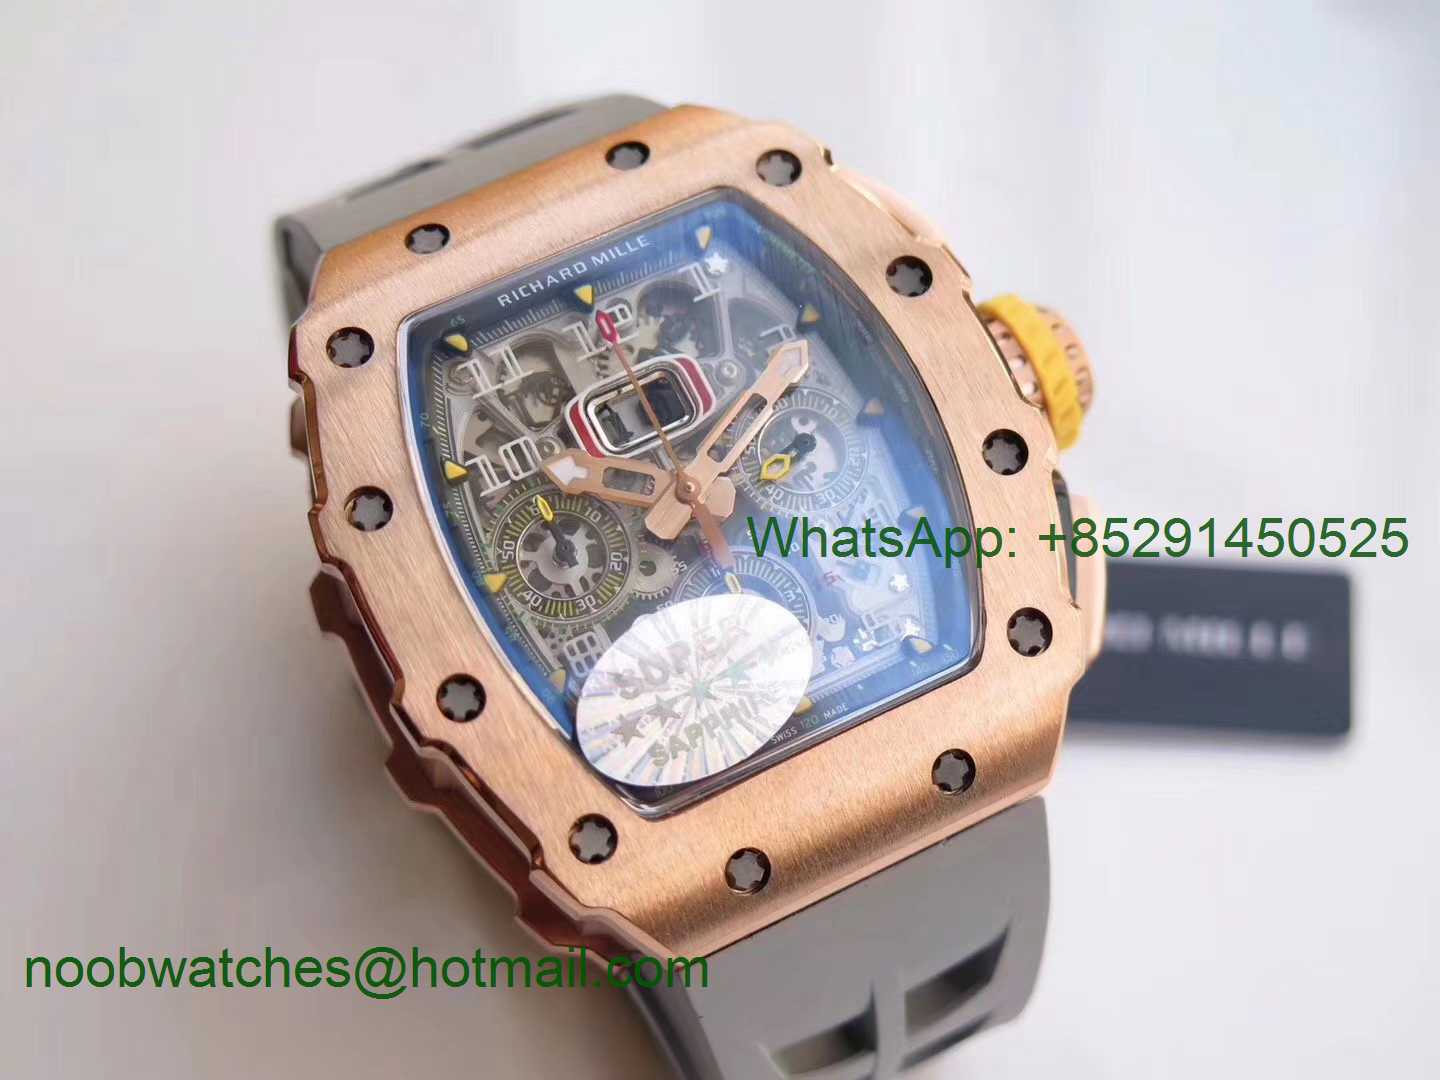 Replica Richard Mille RM011 Rose Gold Chronograph KVF 1:1 Best Edition Crystal Skeleton Dial on Gray Rubber Strap A7750